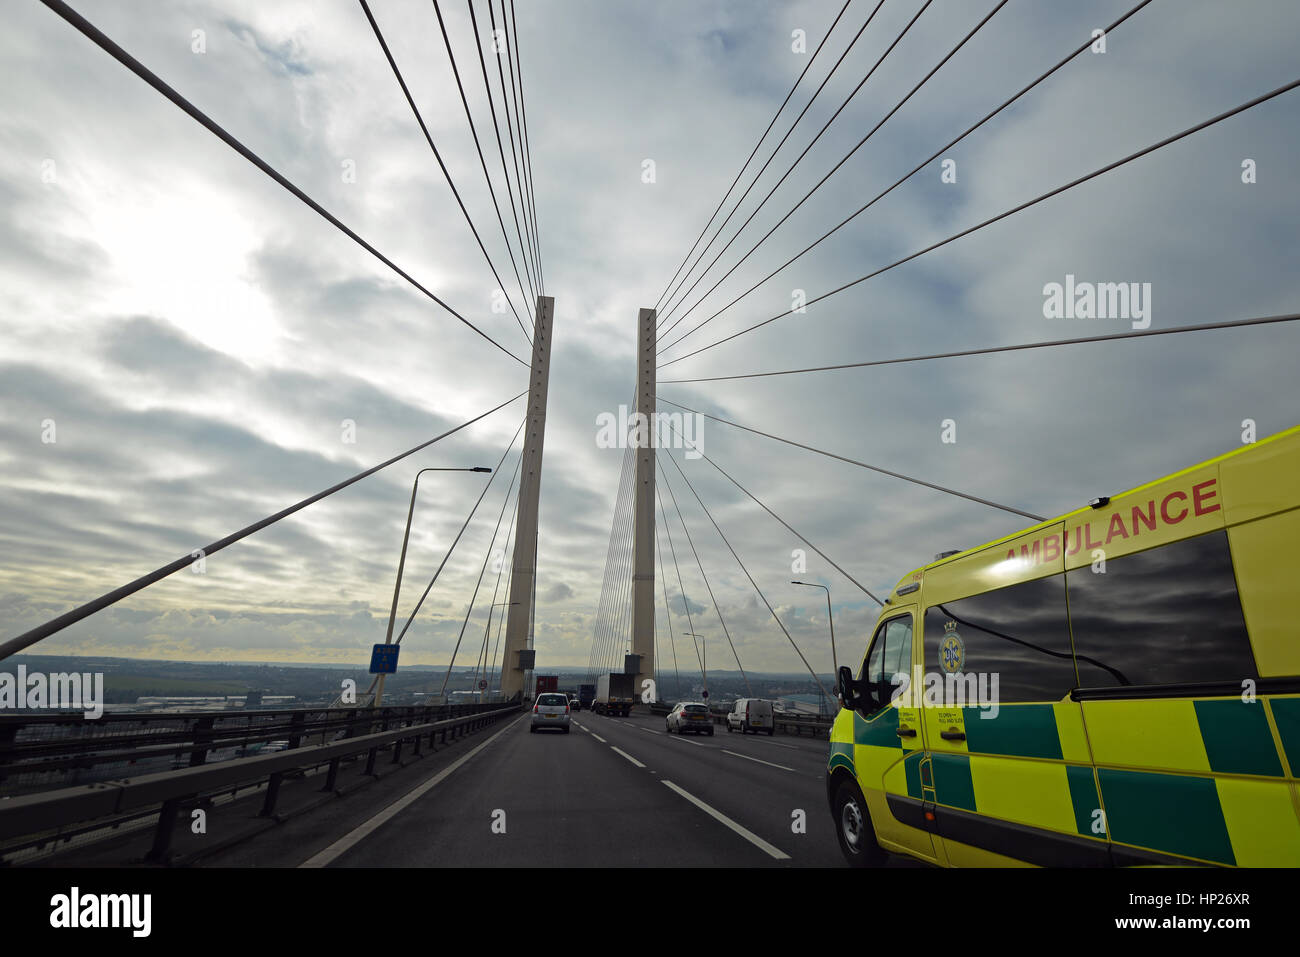 An ambulance travelling over the Queen Elizabeth II 'Dartford' bridge, from Essex to Kent, UK. Space for copy Stock Photo